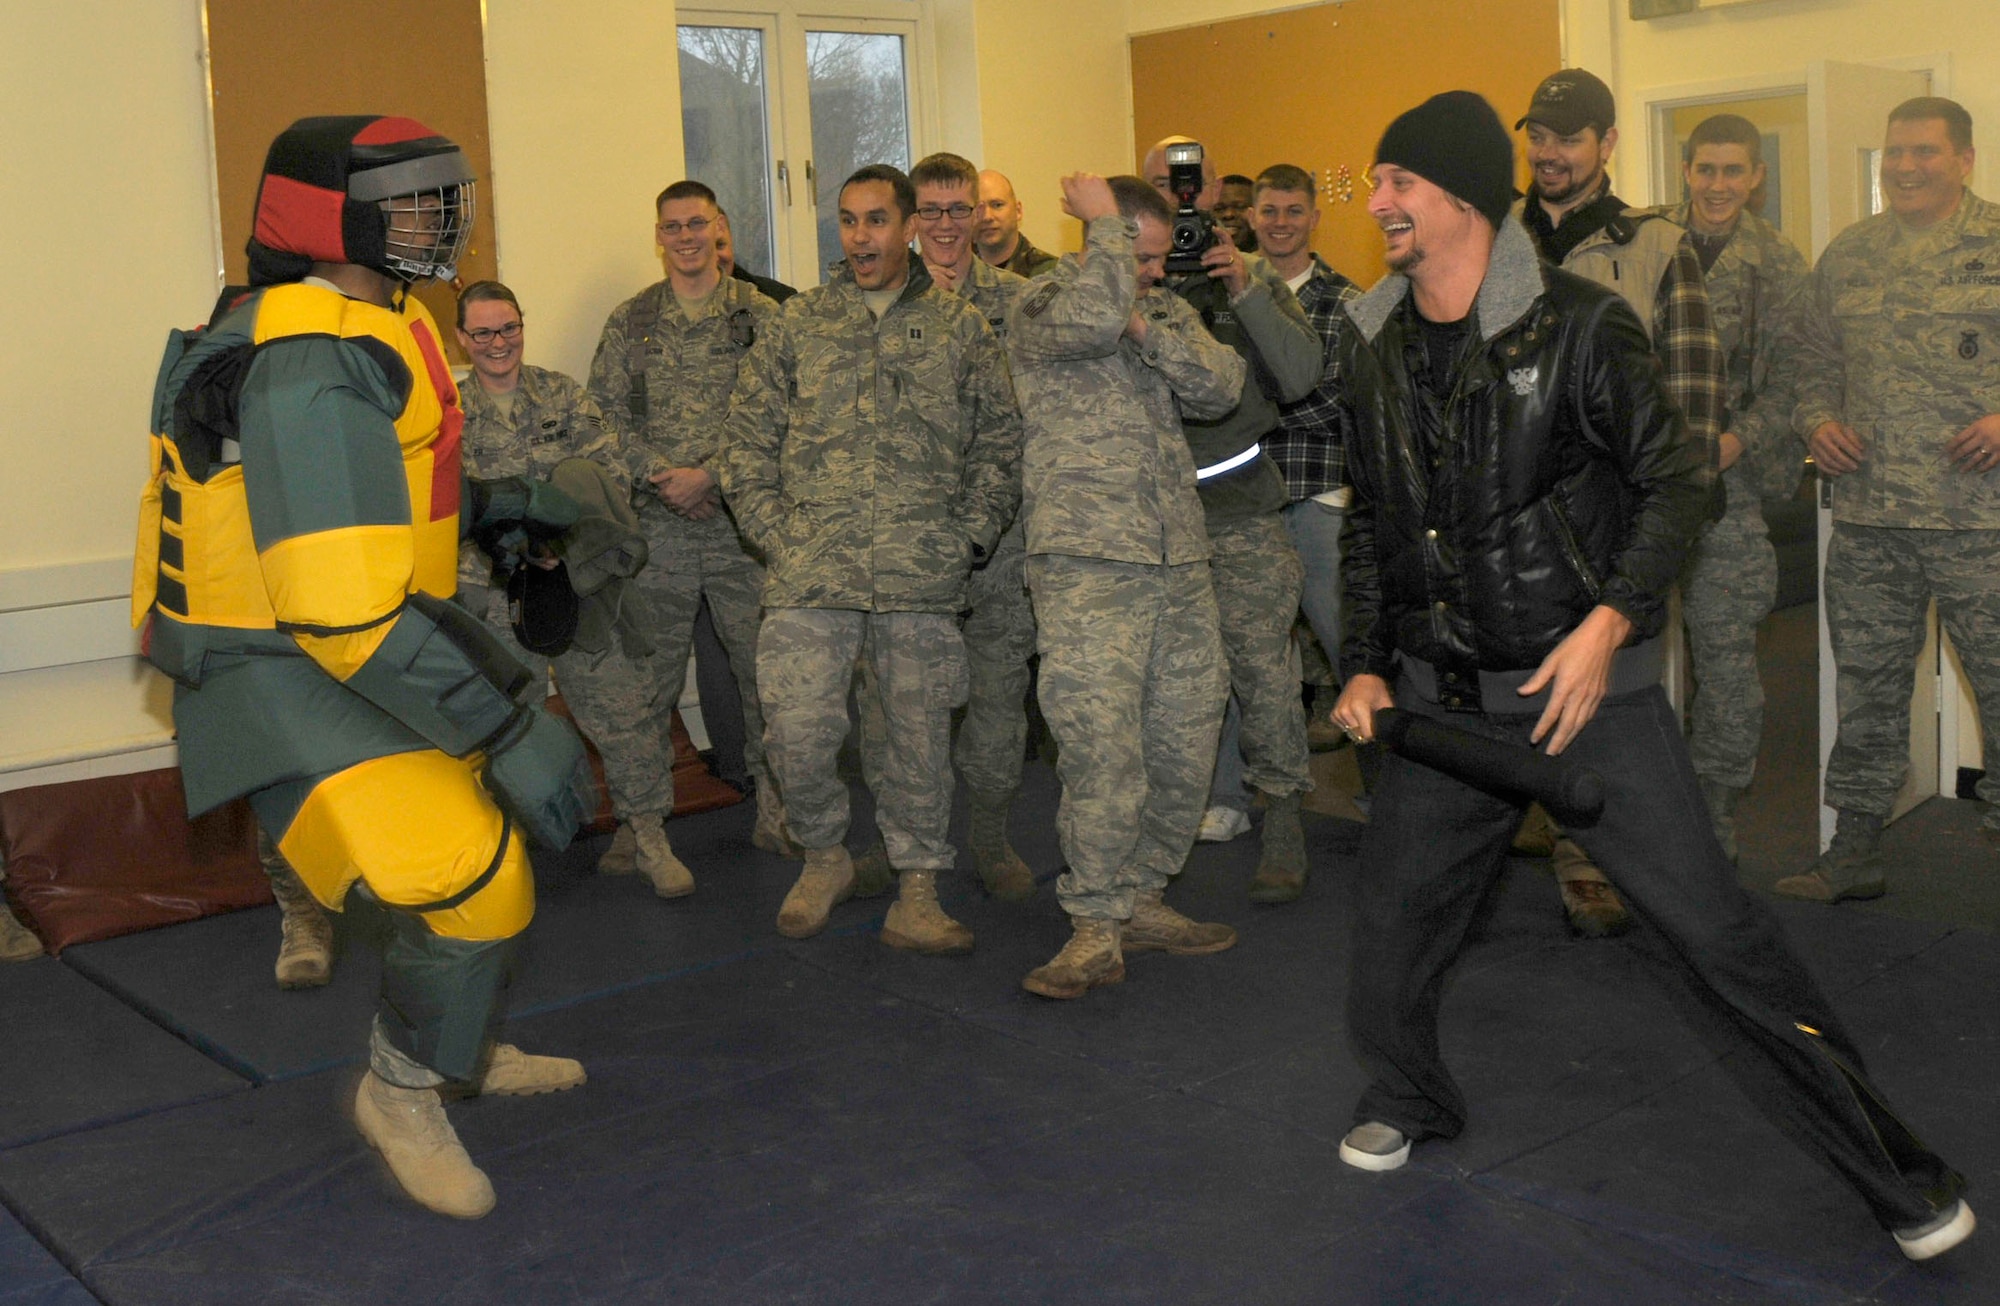 Kid Rock prepares to swing a baton at Airman 1st Class Melvin Walker, 48th Security Forces Squadron member, at RAF Feltwell, England, Dec. 10. Kid Rock toured the facility called Defense University and participated in a few training exercises. Kid Rock was joined by comedian Carlos Mencia and singer Jessie James as they toured bases in Europe and Southwest Asia to show their appreciation and support for the military.  (U. S. Air Force photo/Airman 1st Class Eboni Knox) 